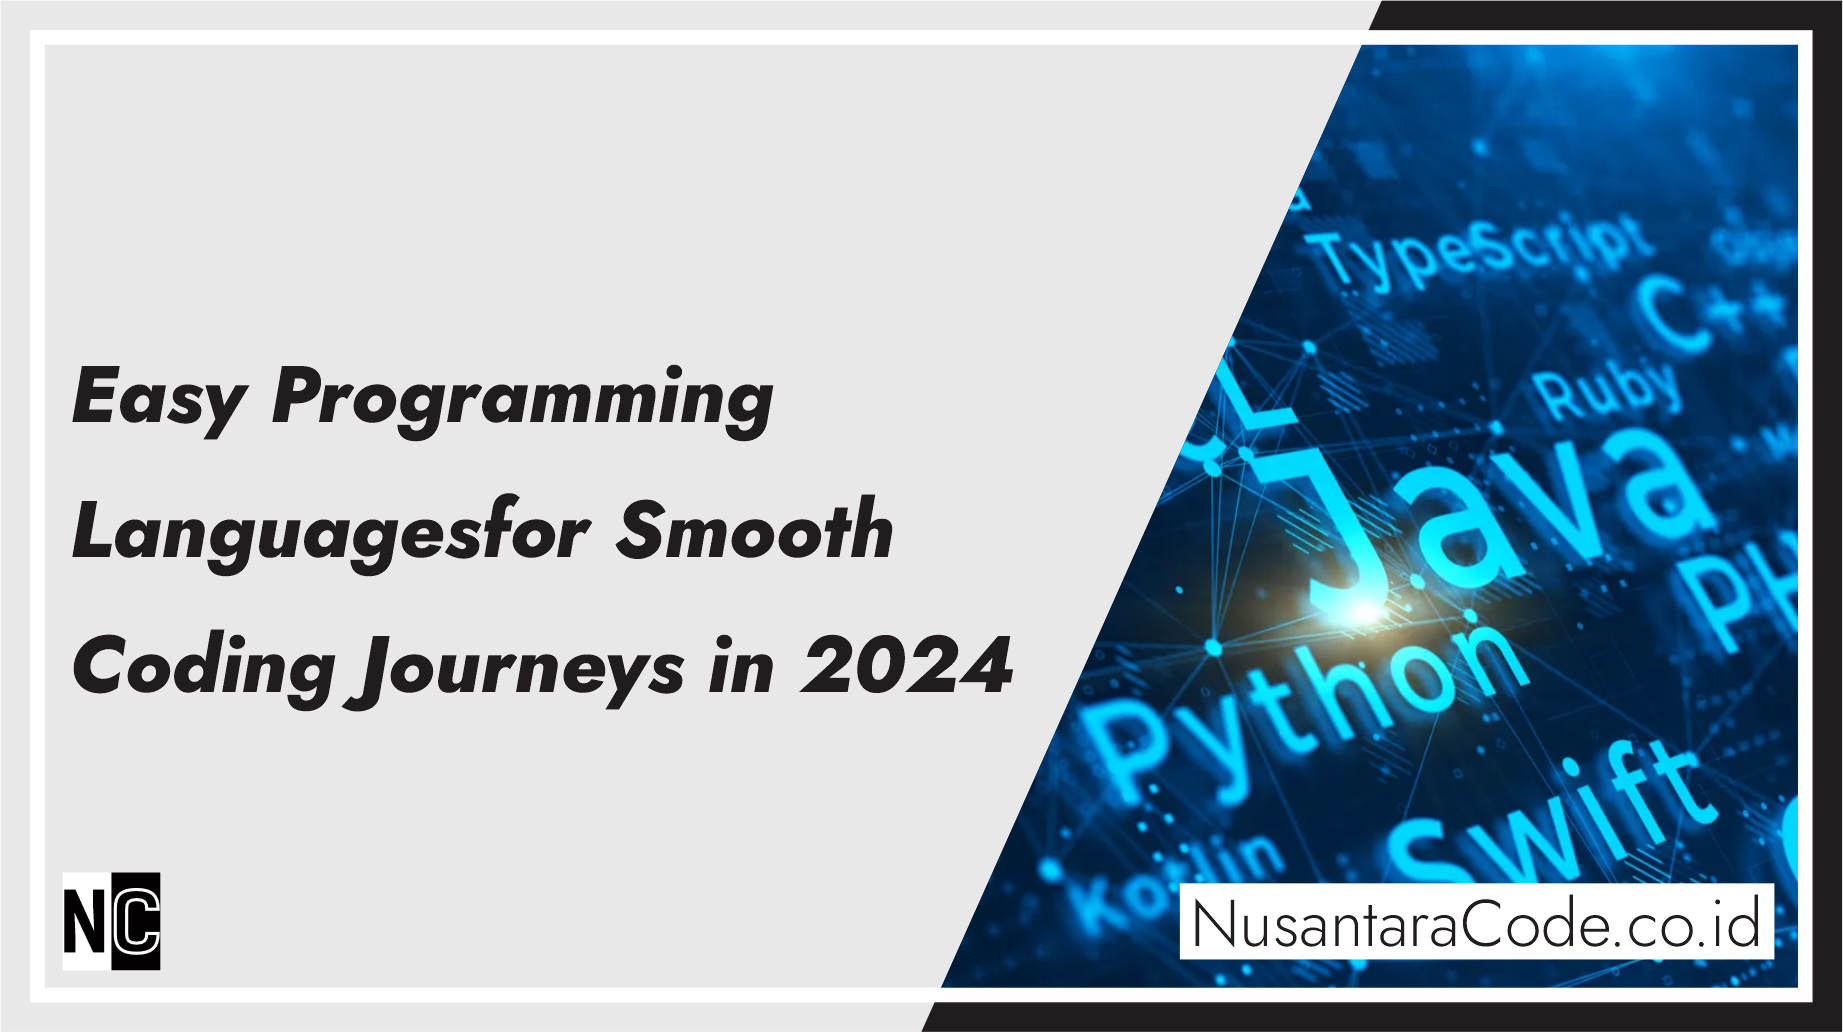 Easy Programming Languages for Smooth Coding Journeys in 2024